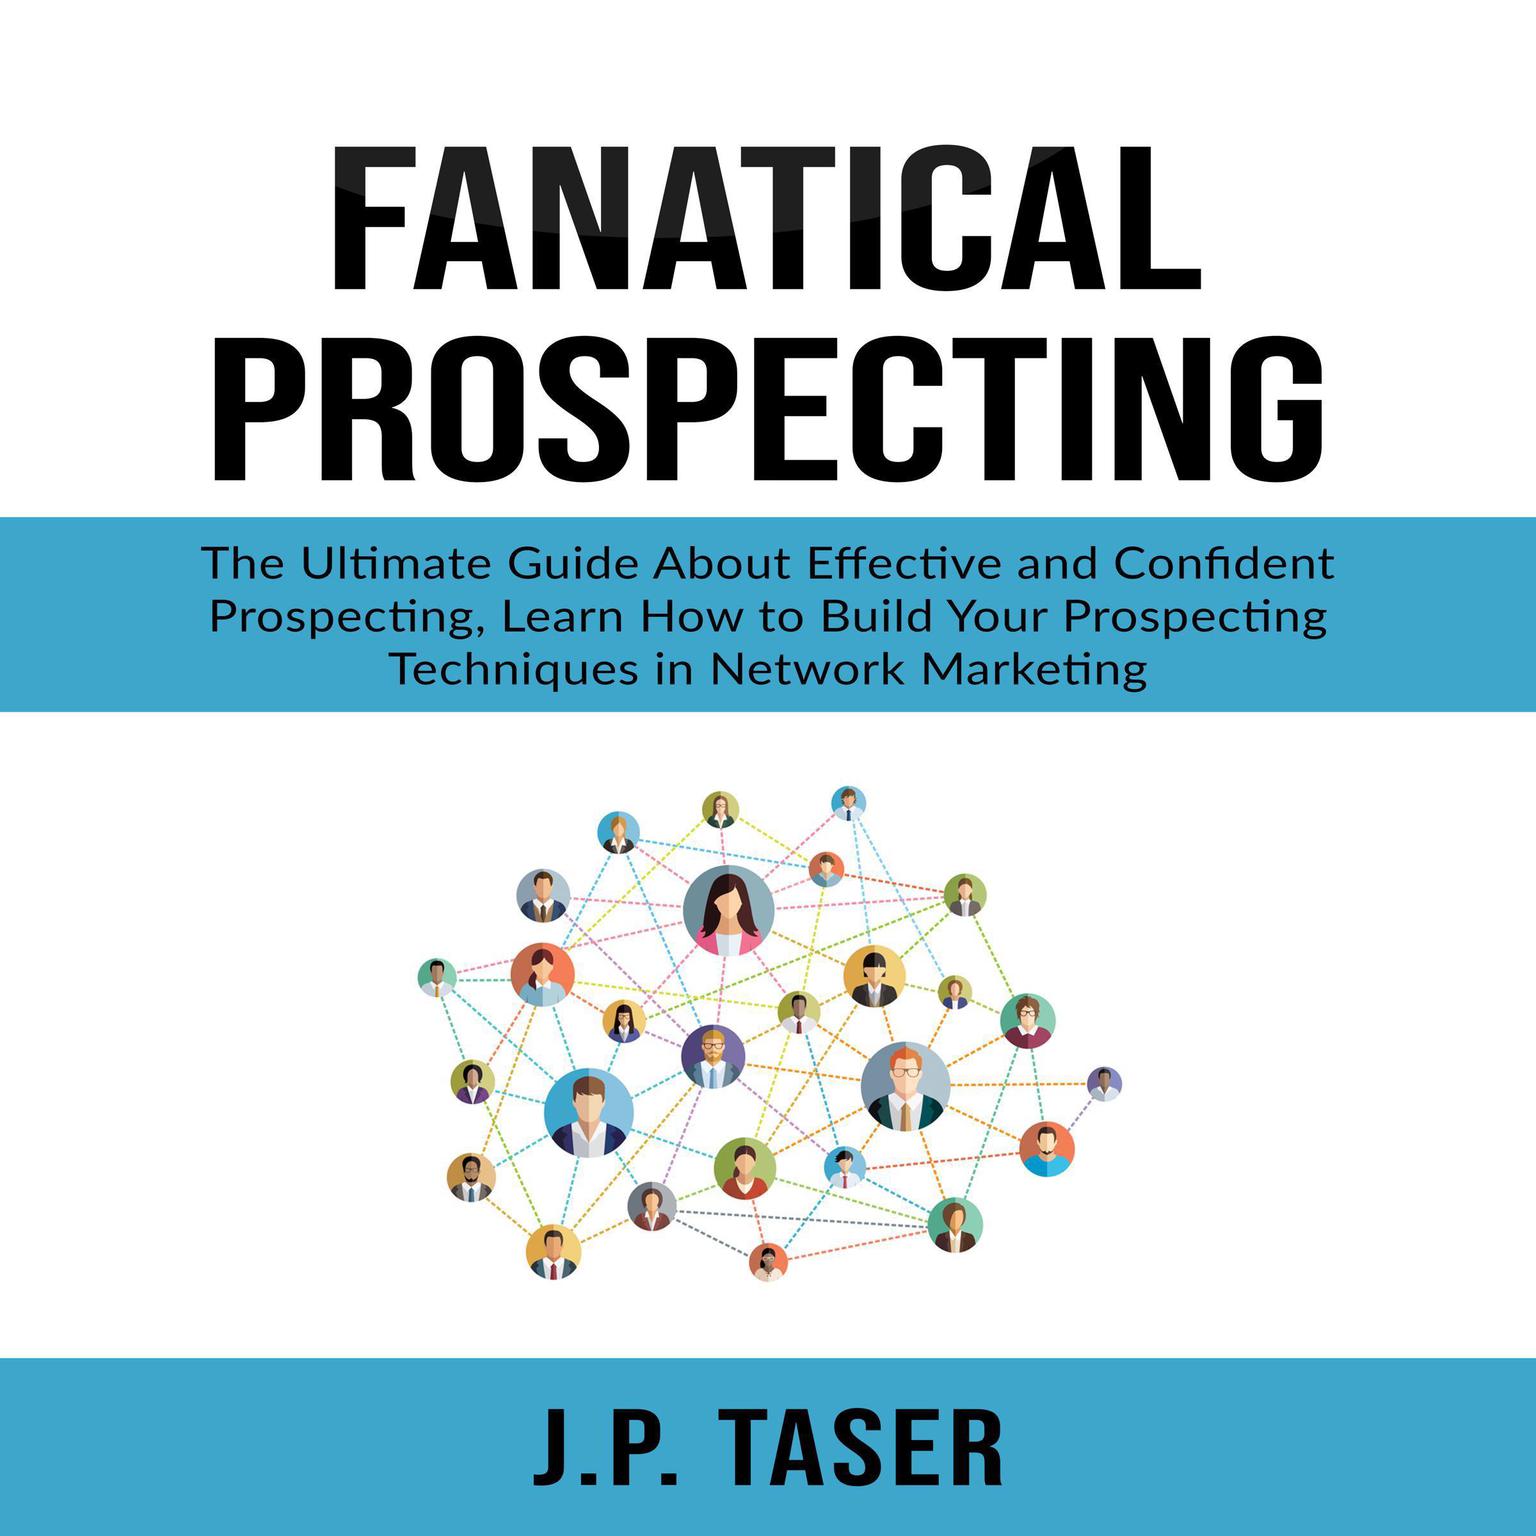 Fanatical Prospecting: The Ultimate Guide About Effective and Confident Prospecting, Learn How to Build Your Prospecting Techniques in Network Marketing  Audiobook, by J.P. Taser